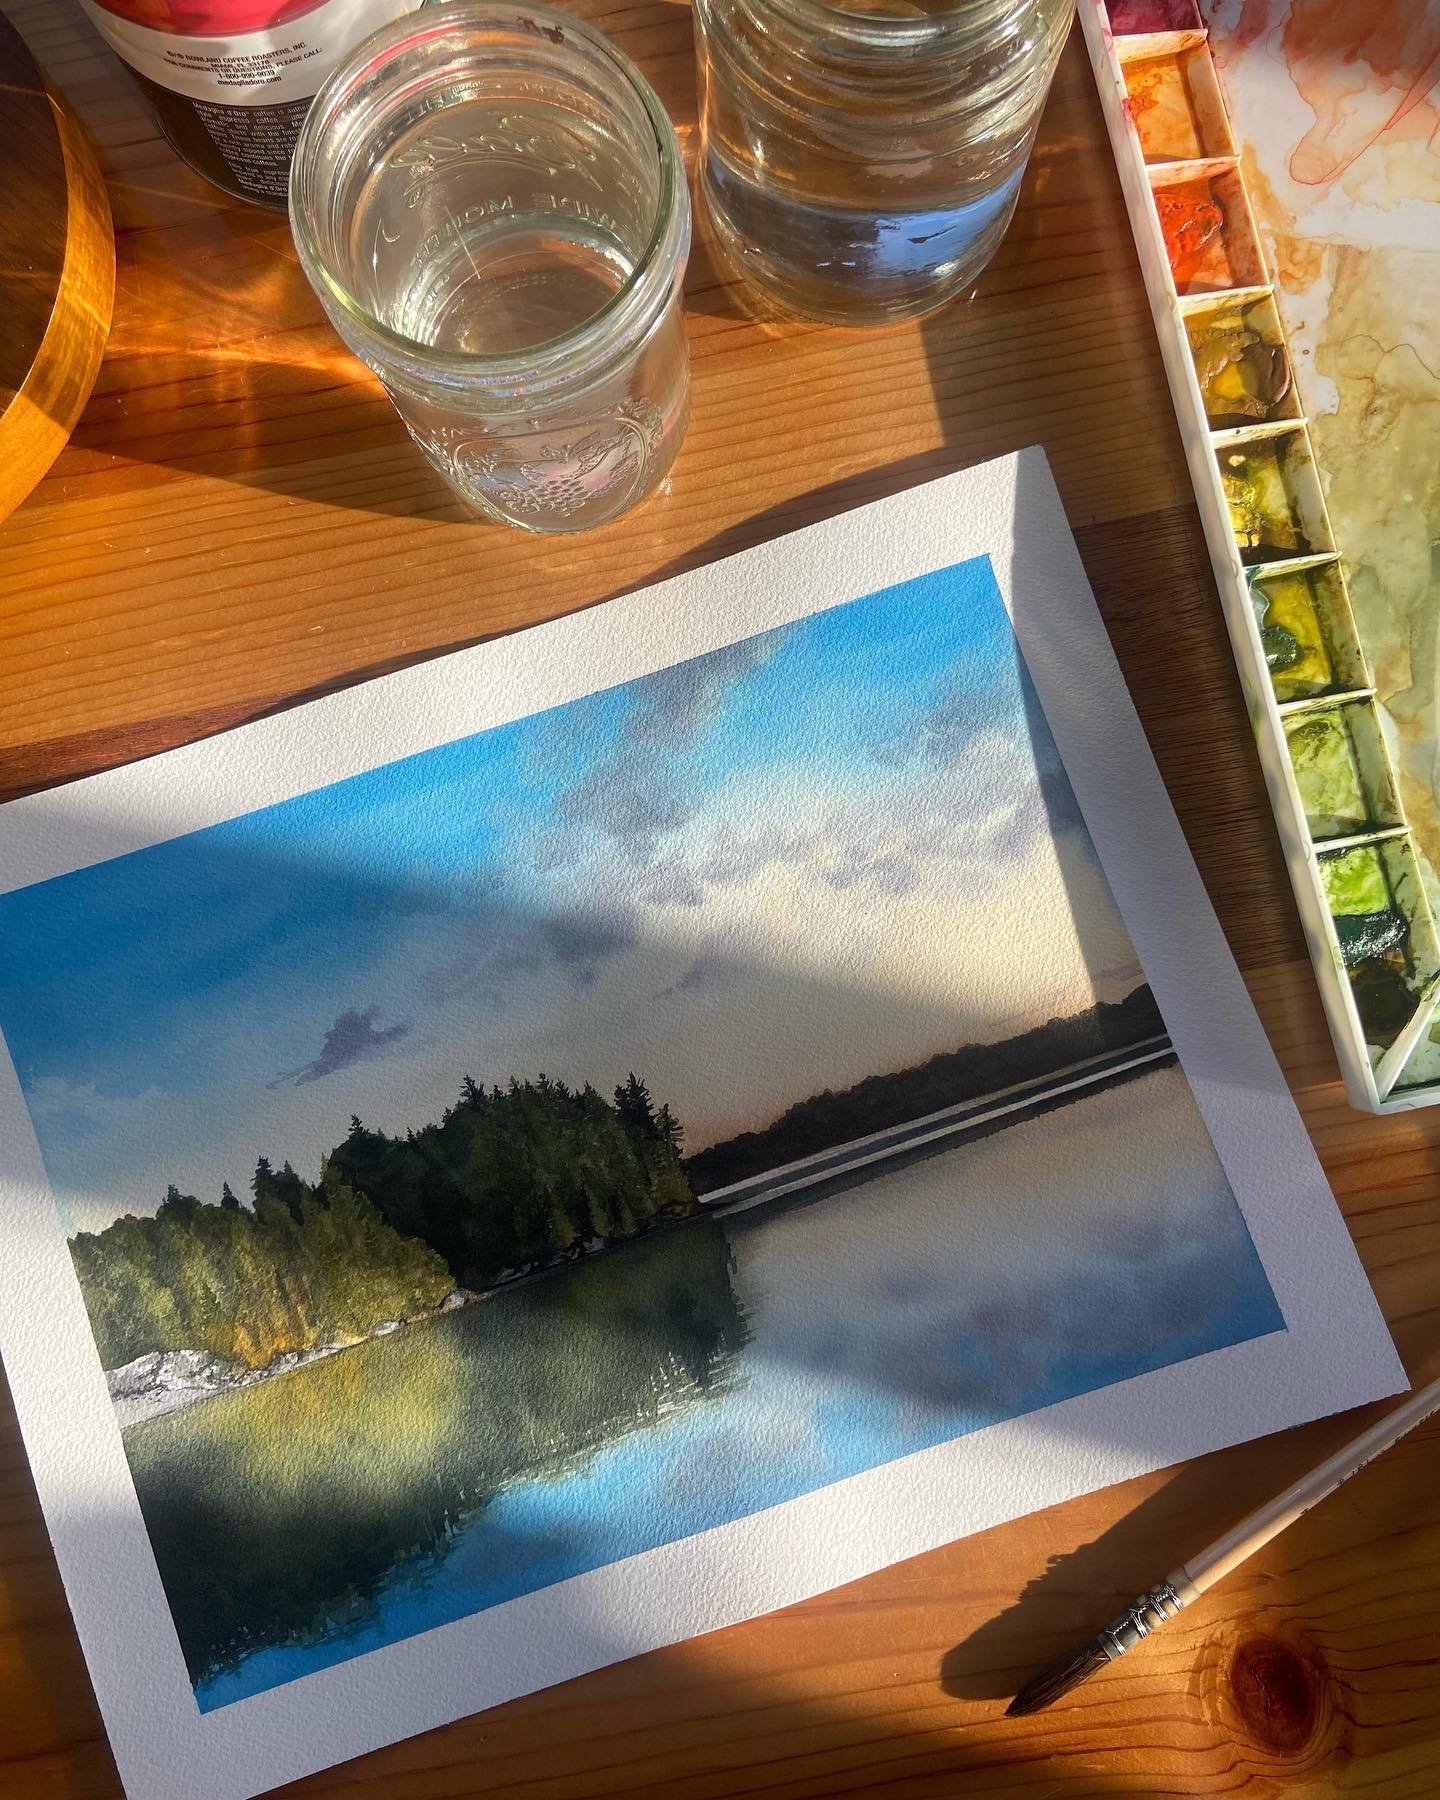 This one's extra special 🌲 

Back in the summer of 2019, my whole family and I celebrated my dad's 60th birthday aboard a houseboat where we spent five days cruising along the tranquil lakes of Voyageur's National Park. With a hot tub and water slid